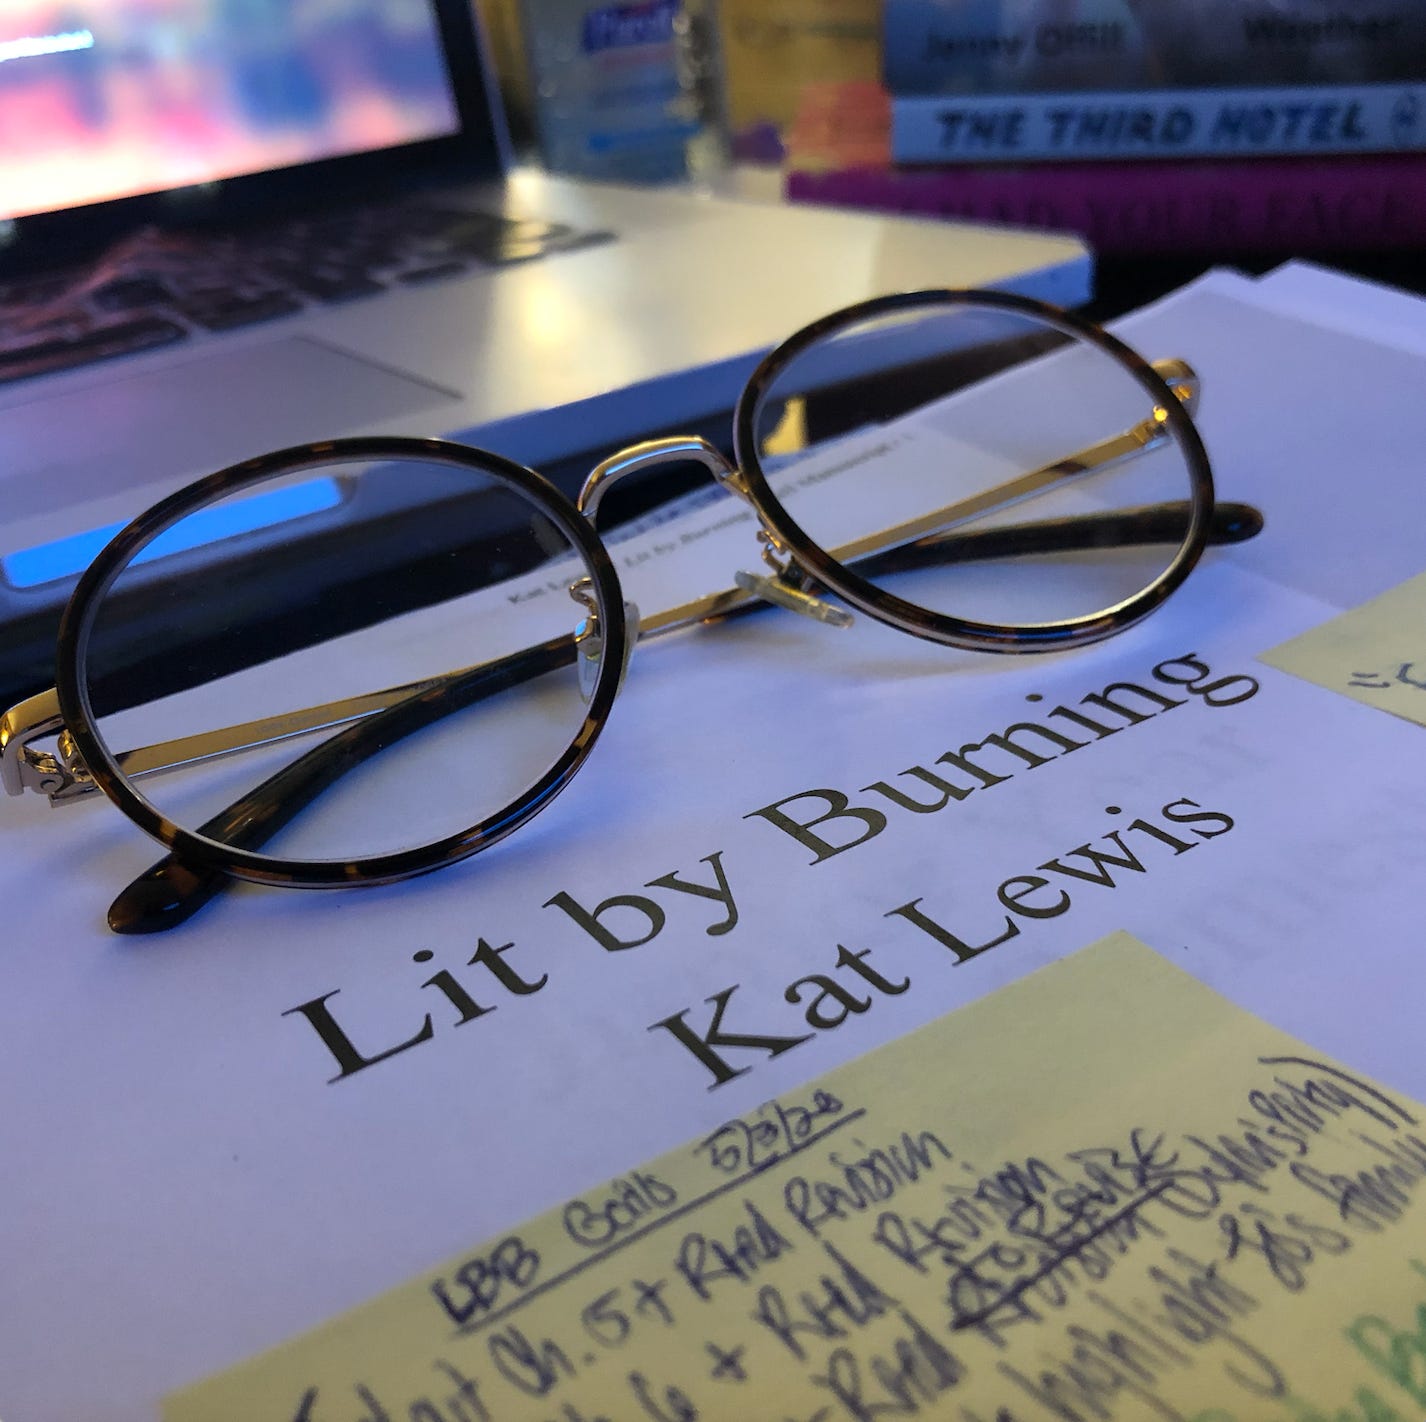 A photo of Kat's printed manuscript for her novel, Lit by Burning. It's dated May 2020.